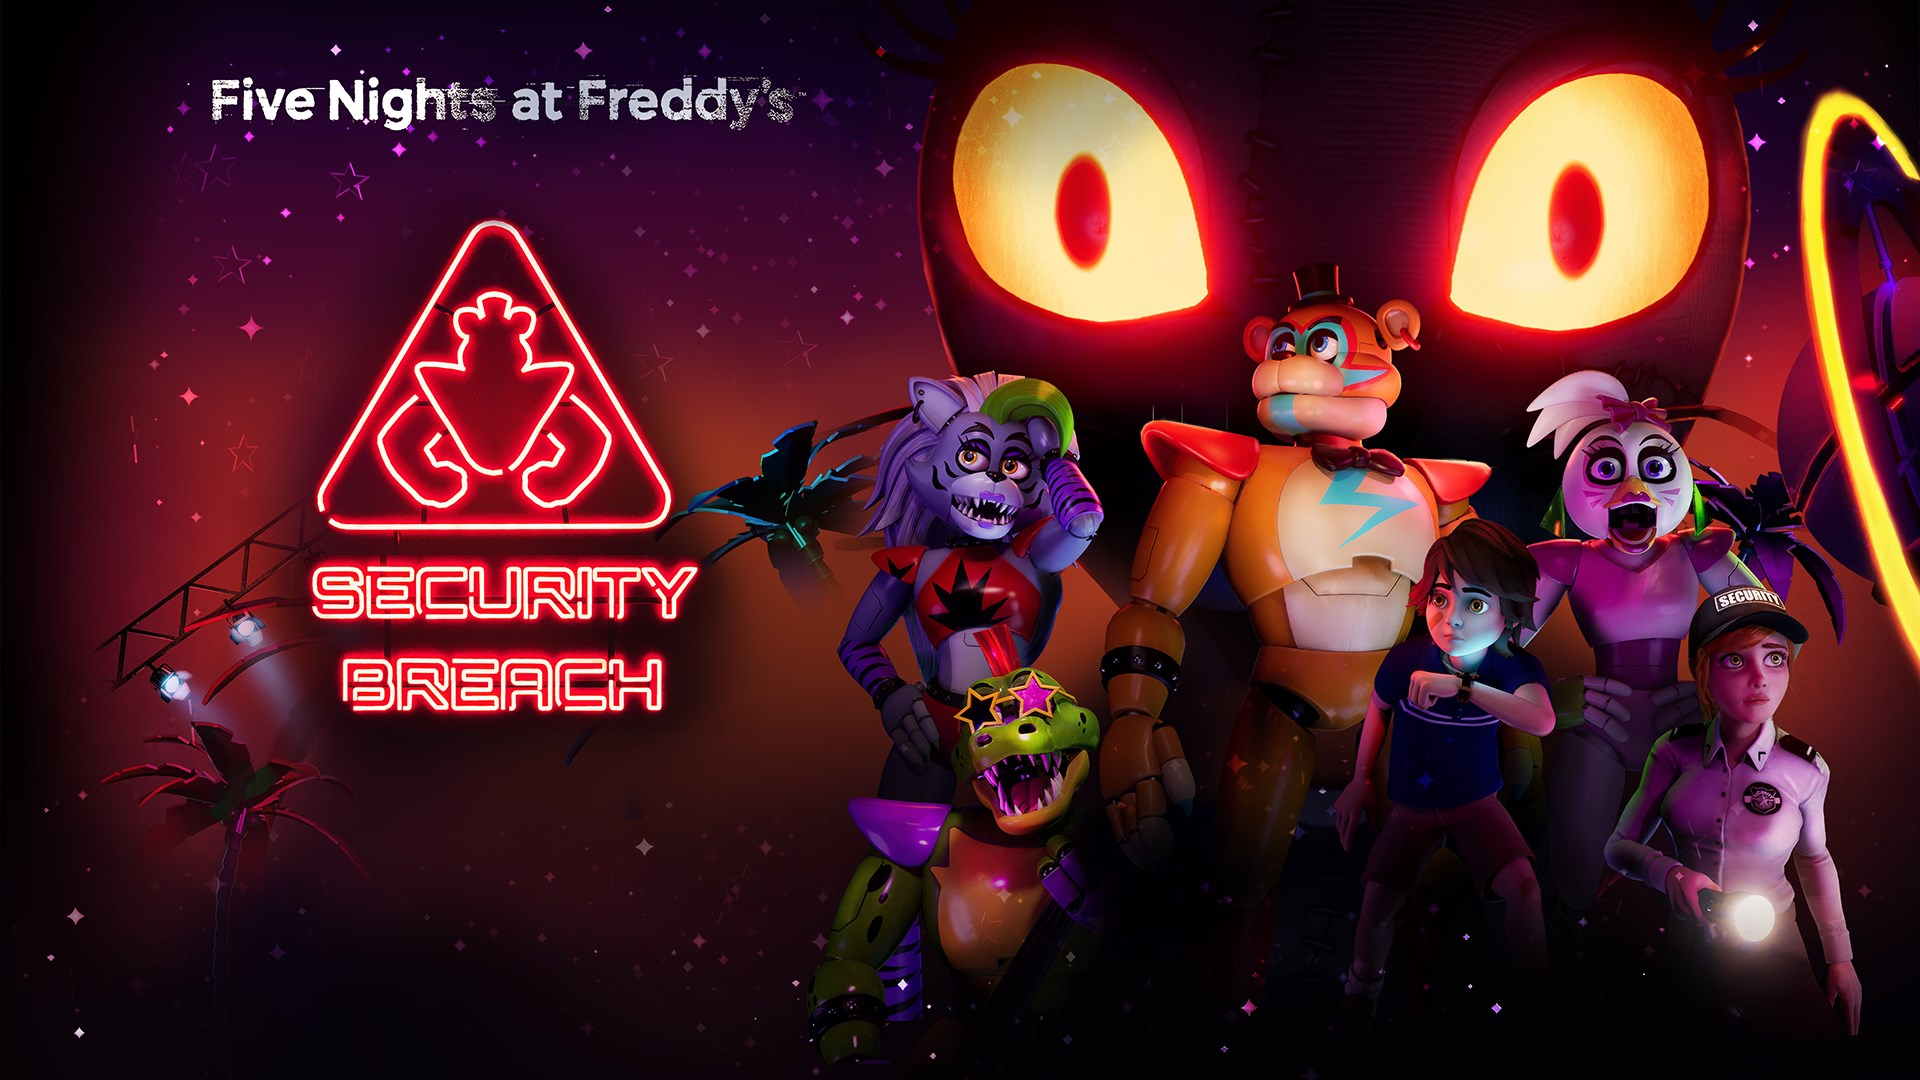 Five Nights at Freddy's: Security Breach is coming to Xbox